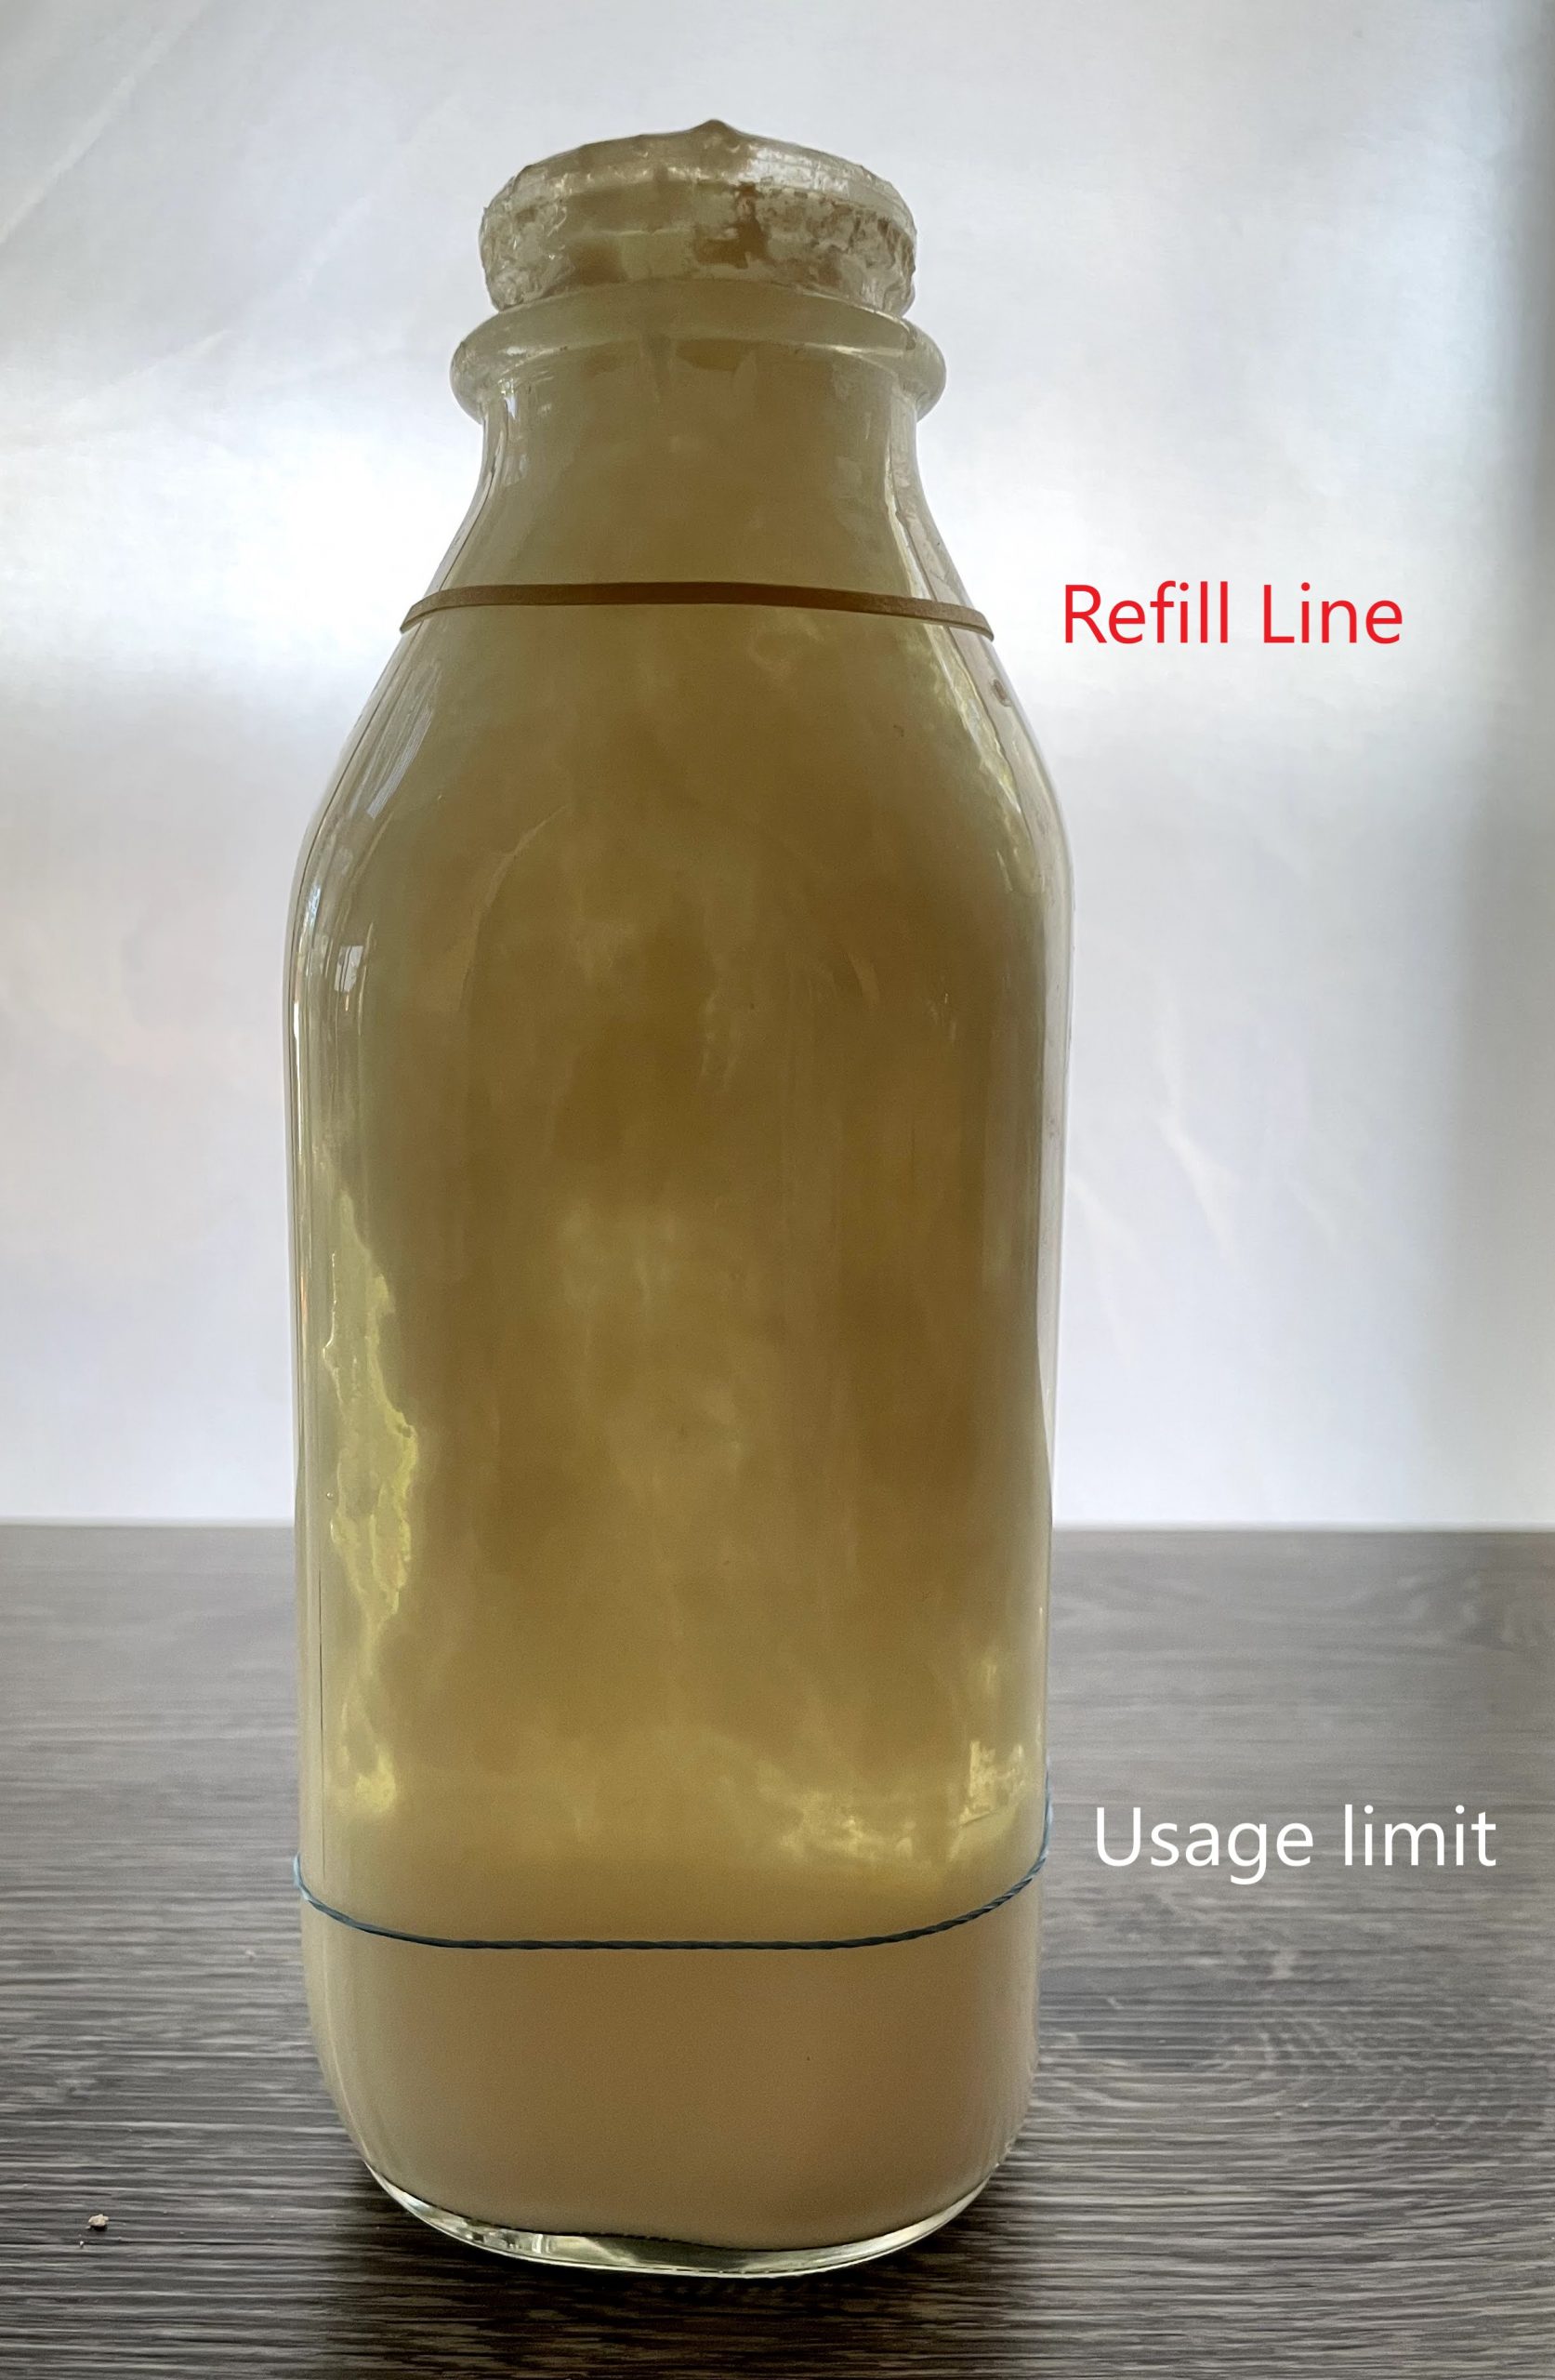 kefir usage and refill  limit